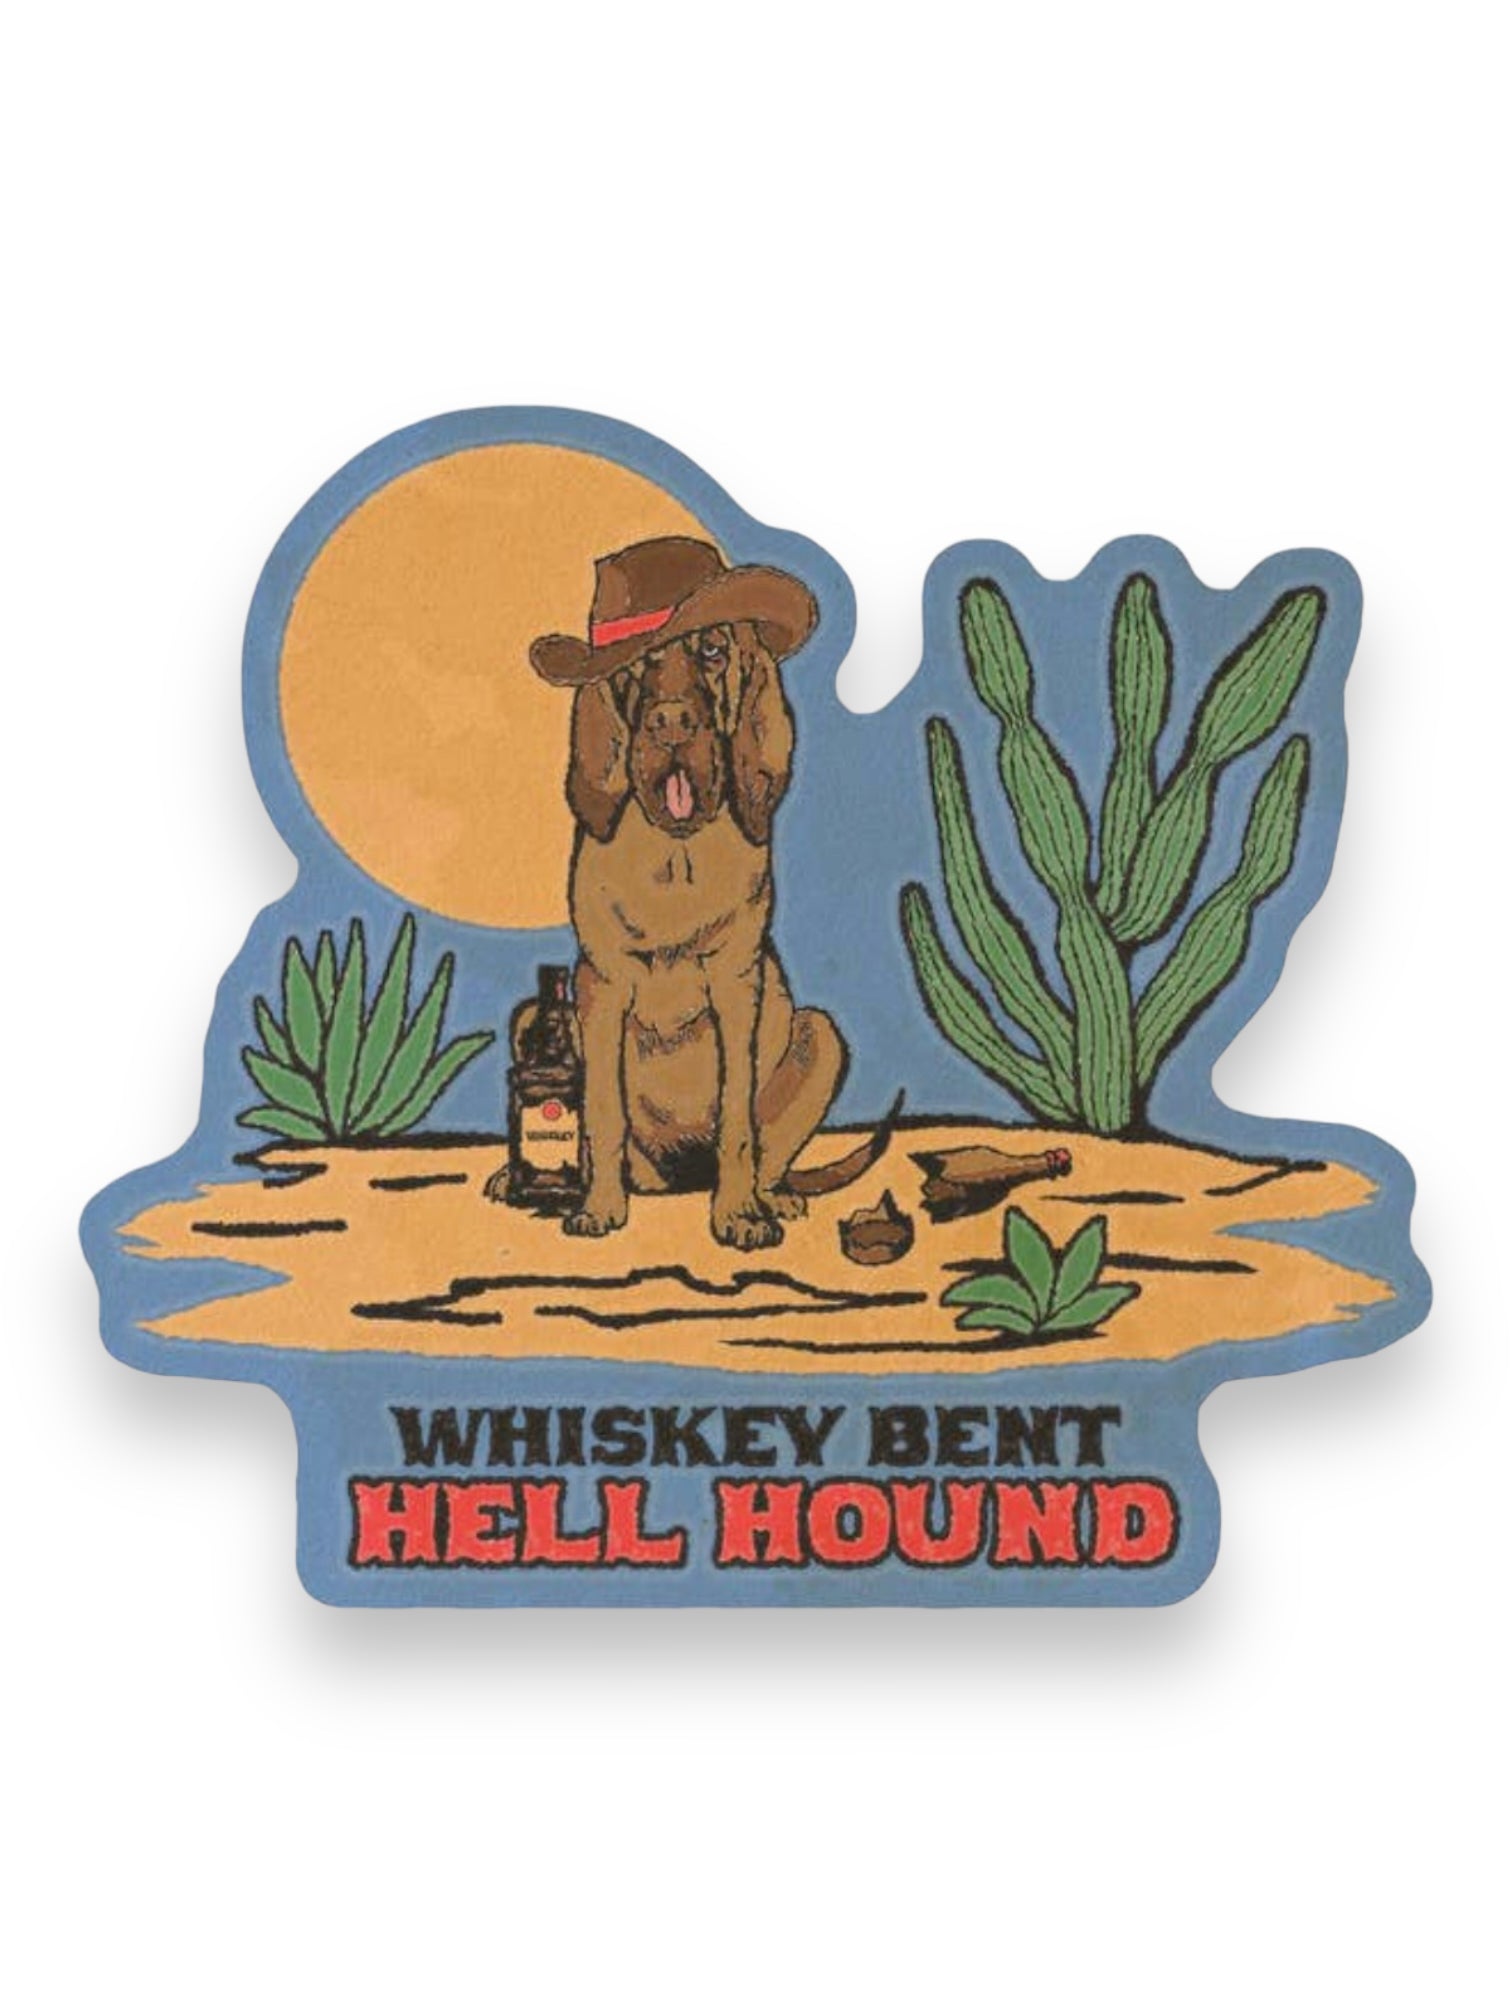 Whiskey Bent Hell Hound Bloodhound Cowboy Sticker by Clusterfunk Studio Sold by Le Monkey House